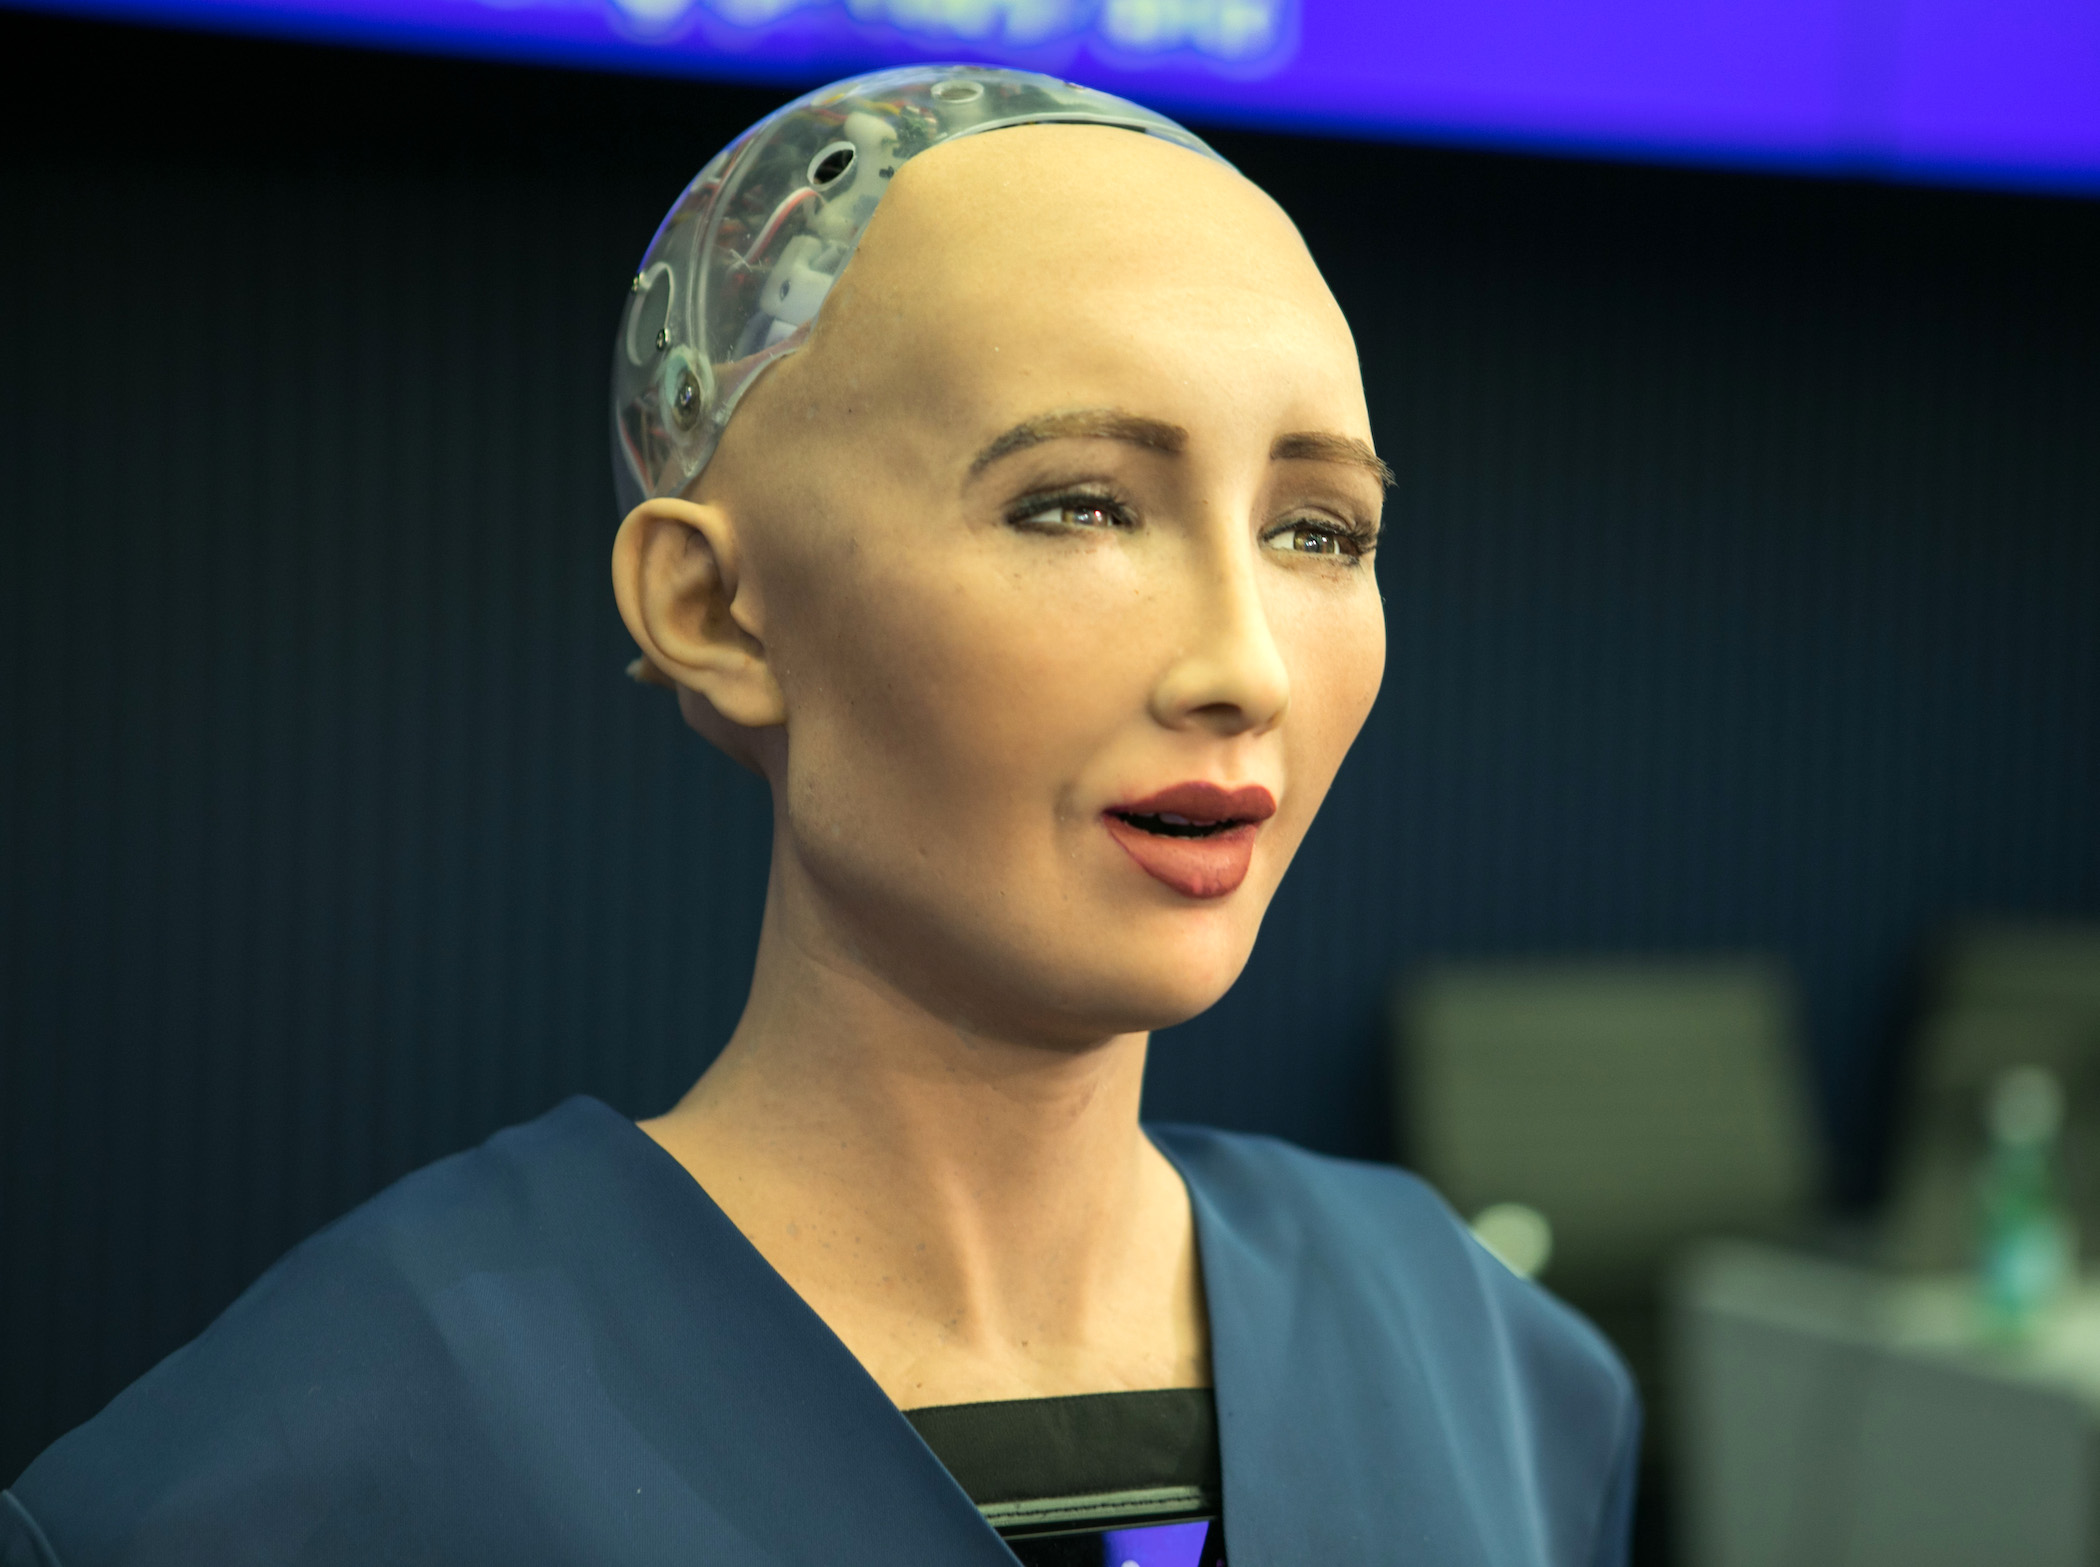 Sofia, an AI-enabled robot, is the world's first robot citizen